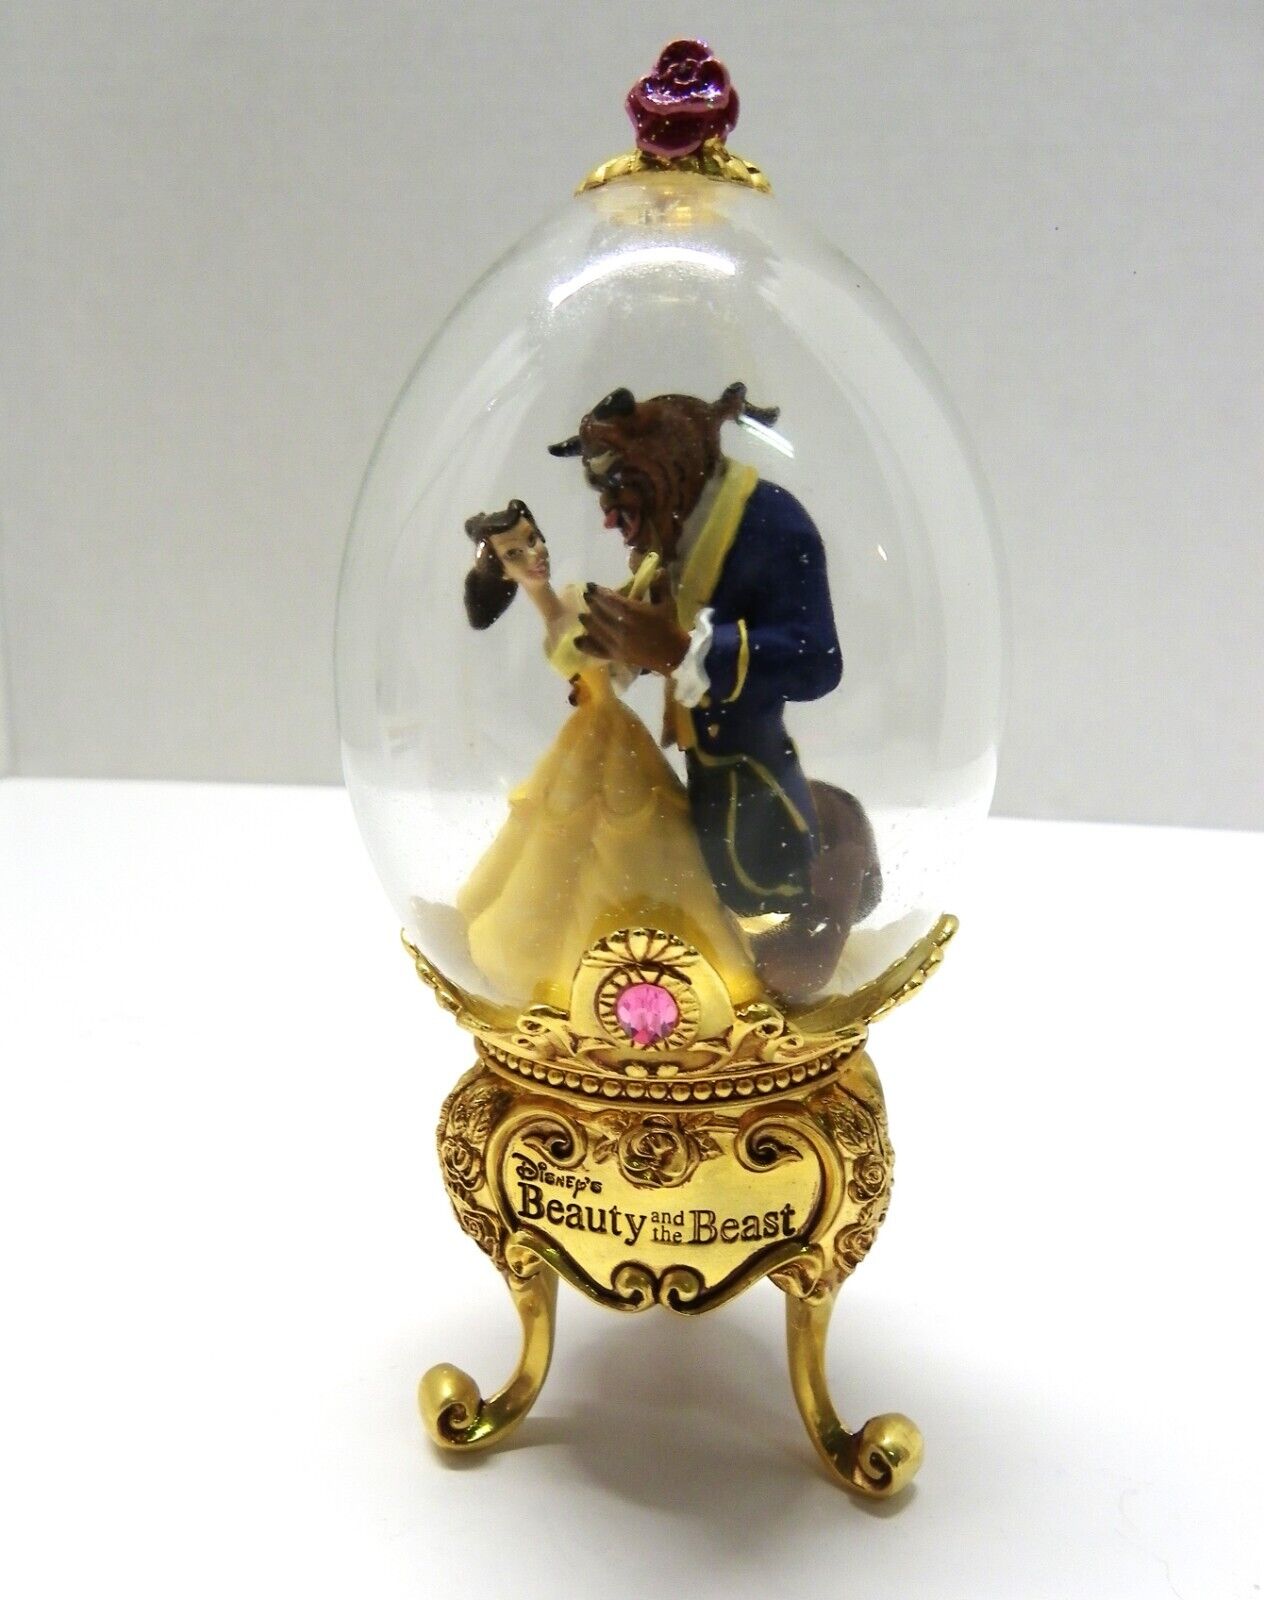 Franklin Mint Disney Beauty & the Beast  Footed Glass Dome Egg 